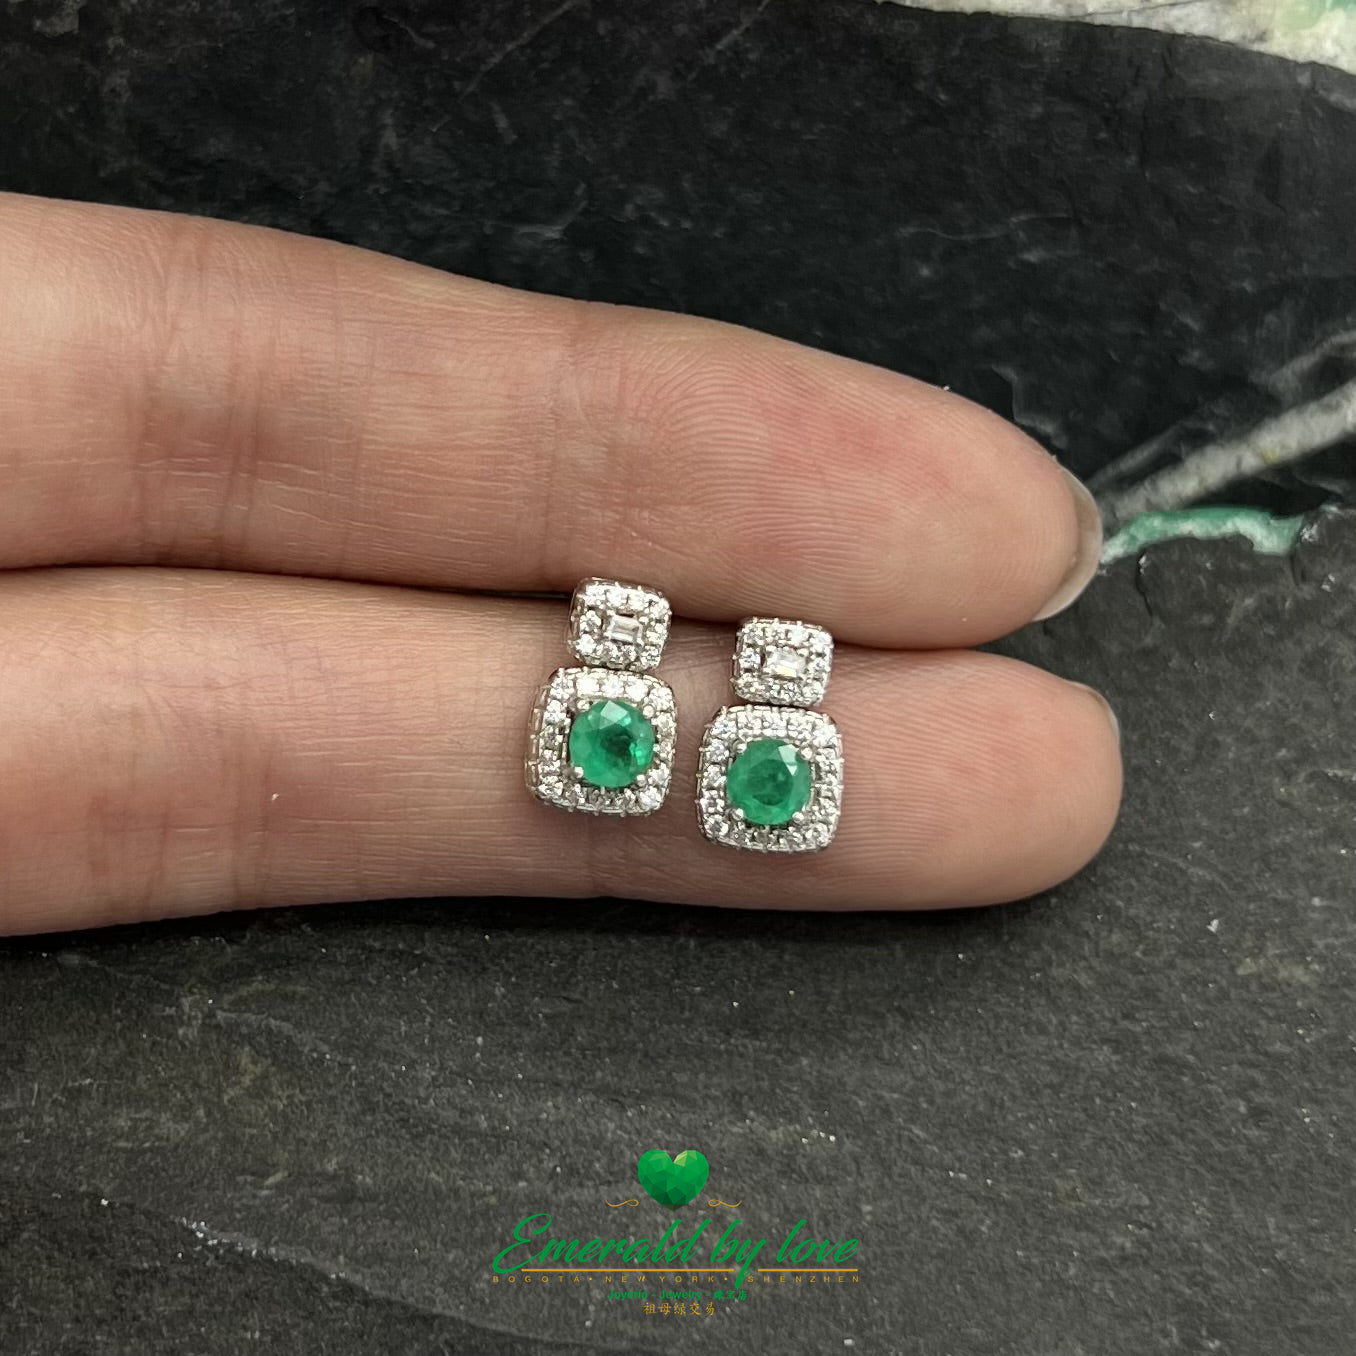 Semi-Long Square Sterling Silver Earrings with Central Pair of Round Emeralds